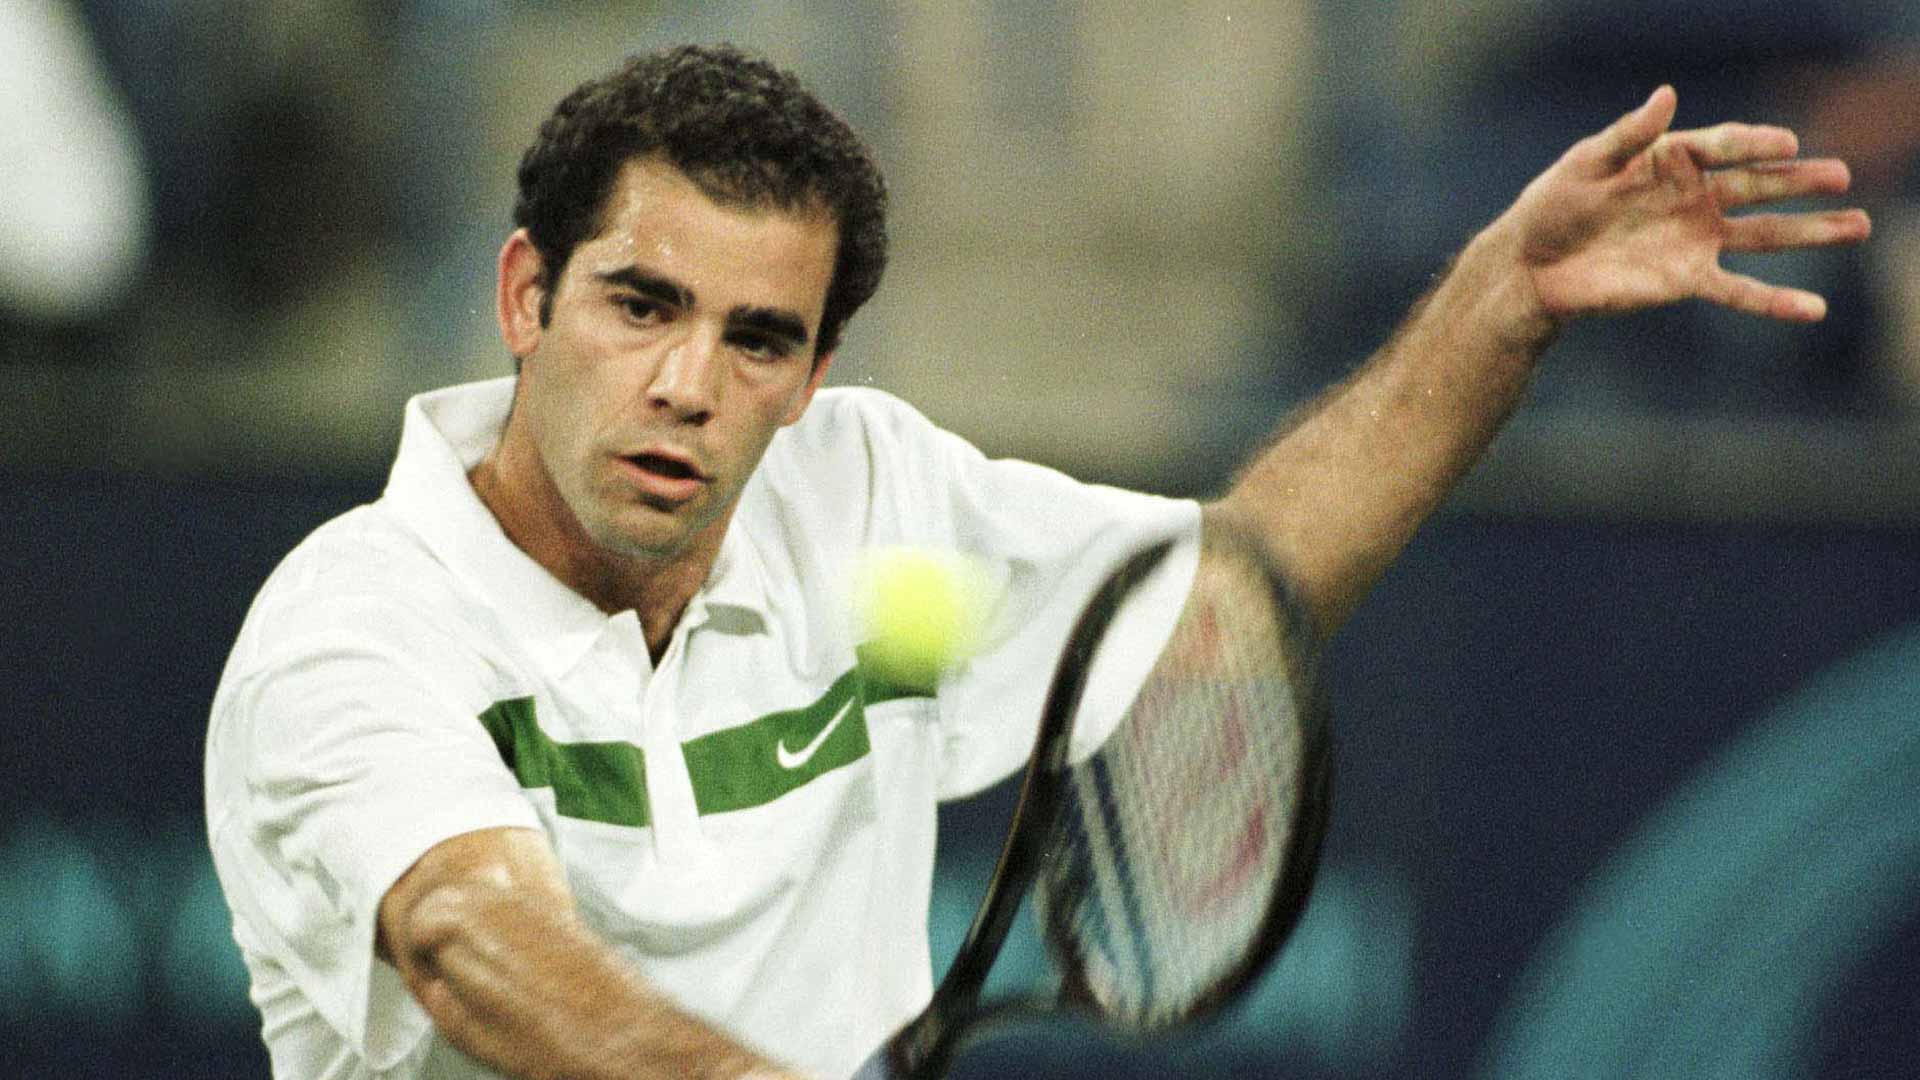 Notable No. 1s In 50 Years Of Pepperstone ATP Rankings (Part 1), ATP Tour